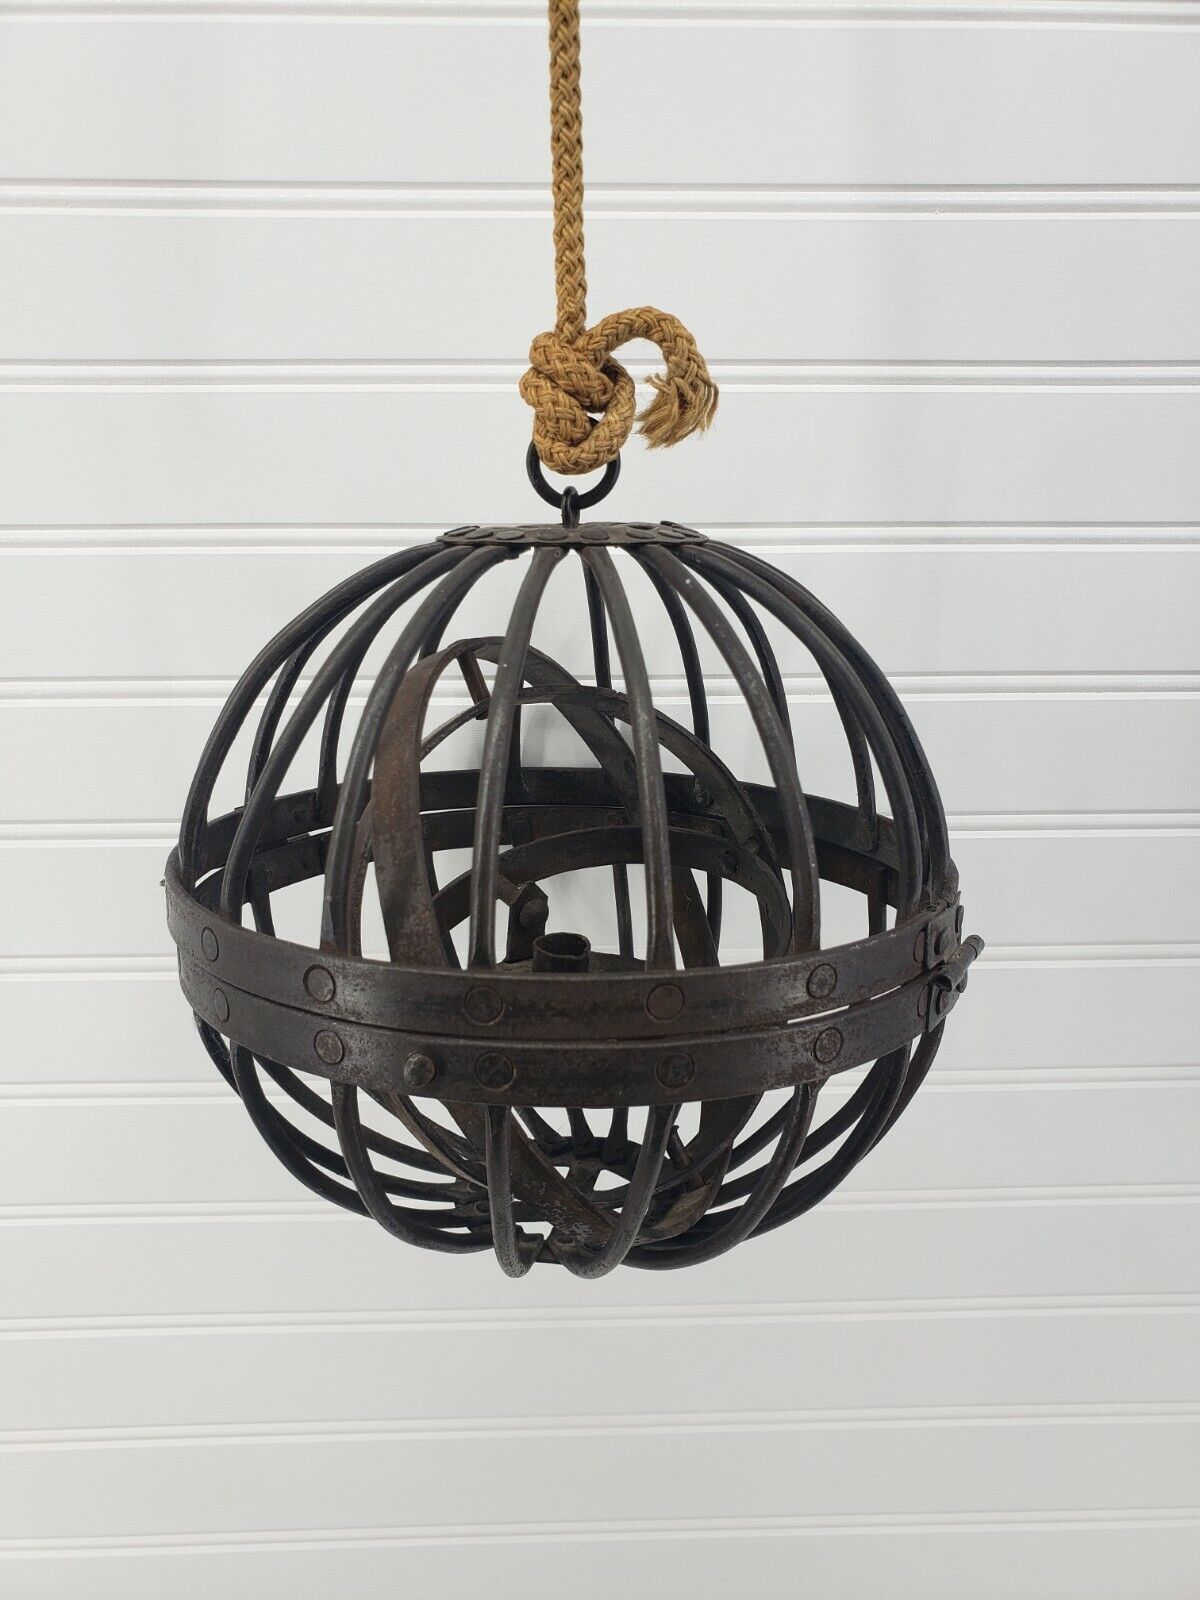 19th Century Antique Ship Gimbal Whale Oil Cage Lamp Lantern Nautical Cast Iron